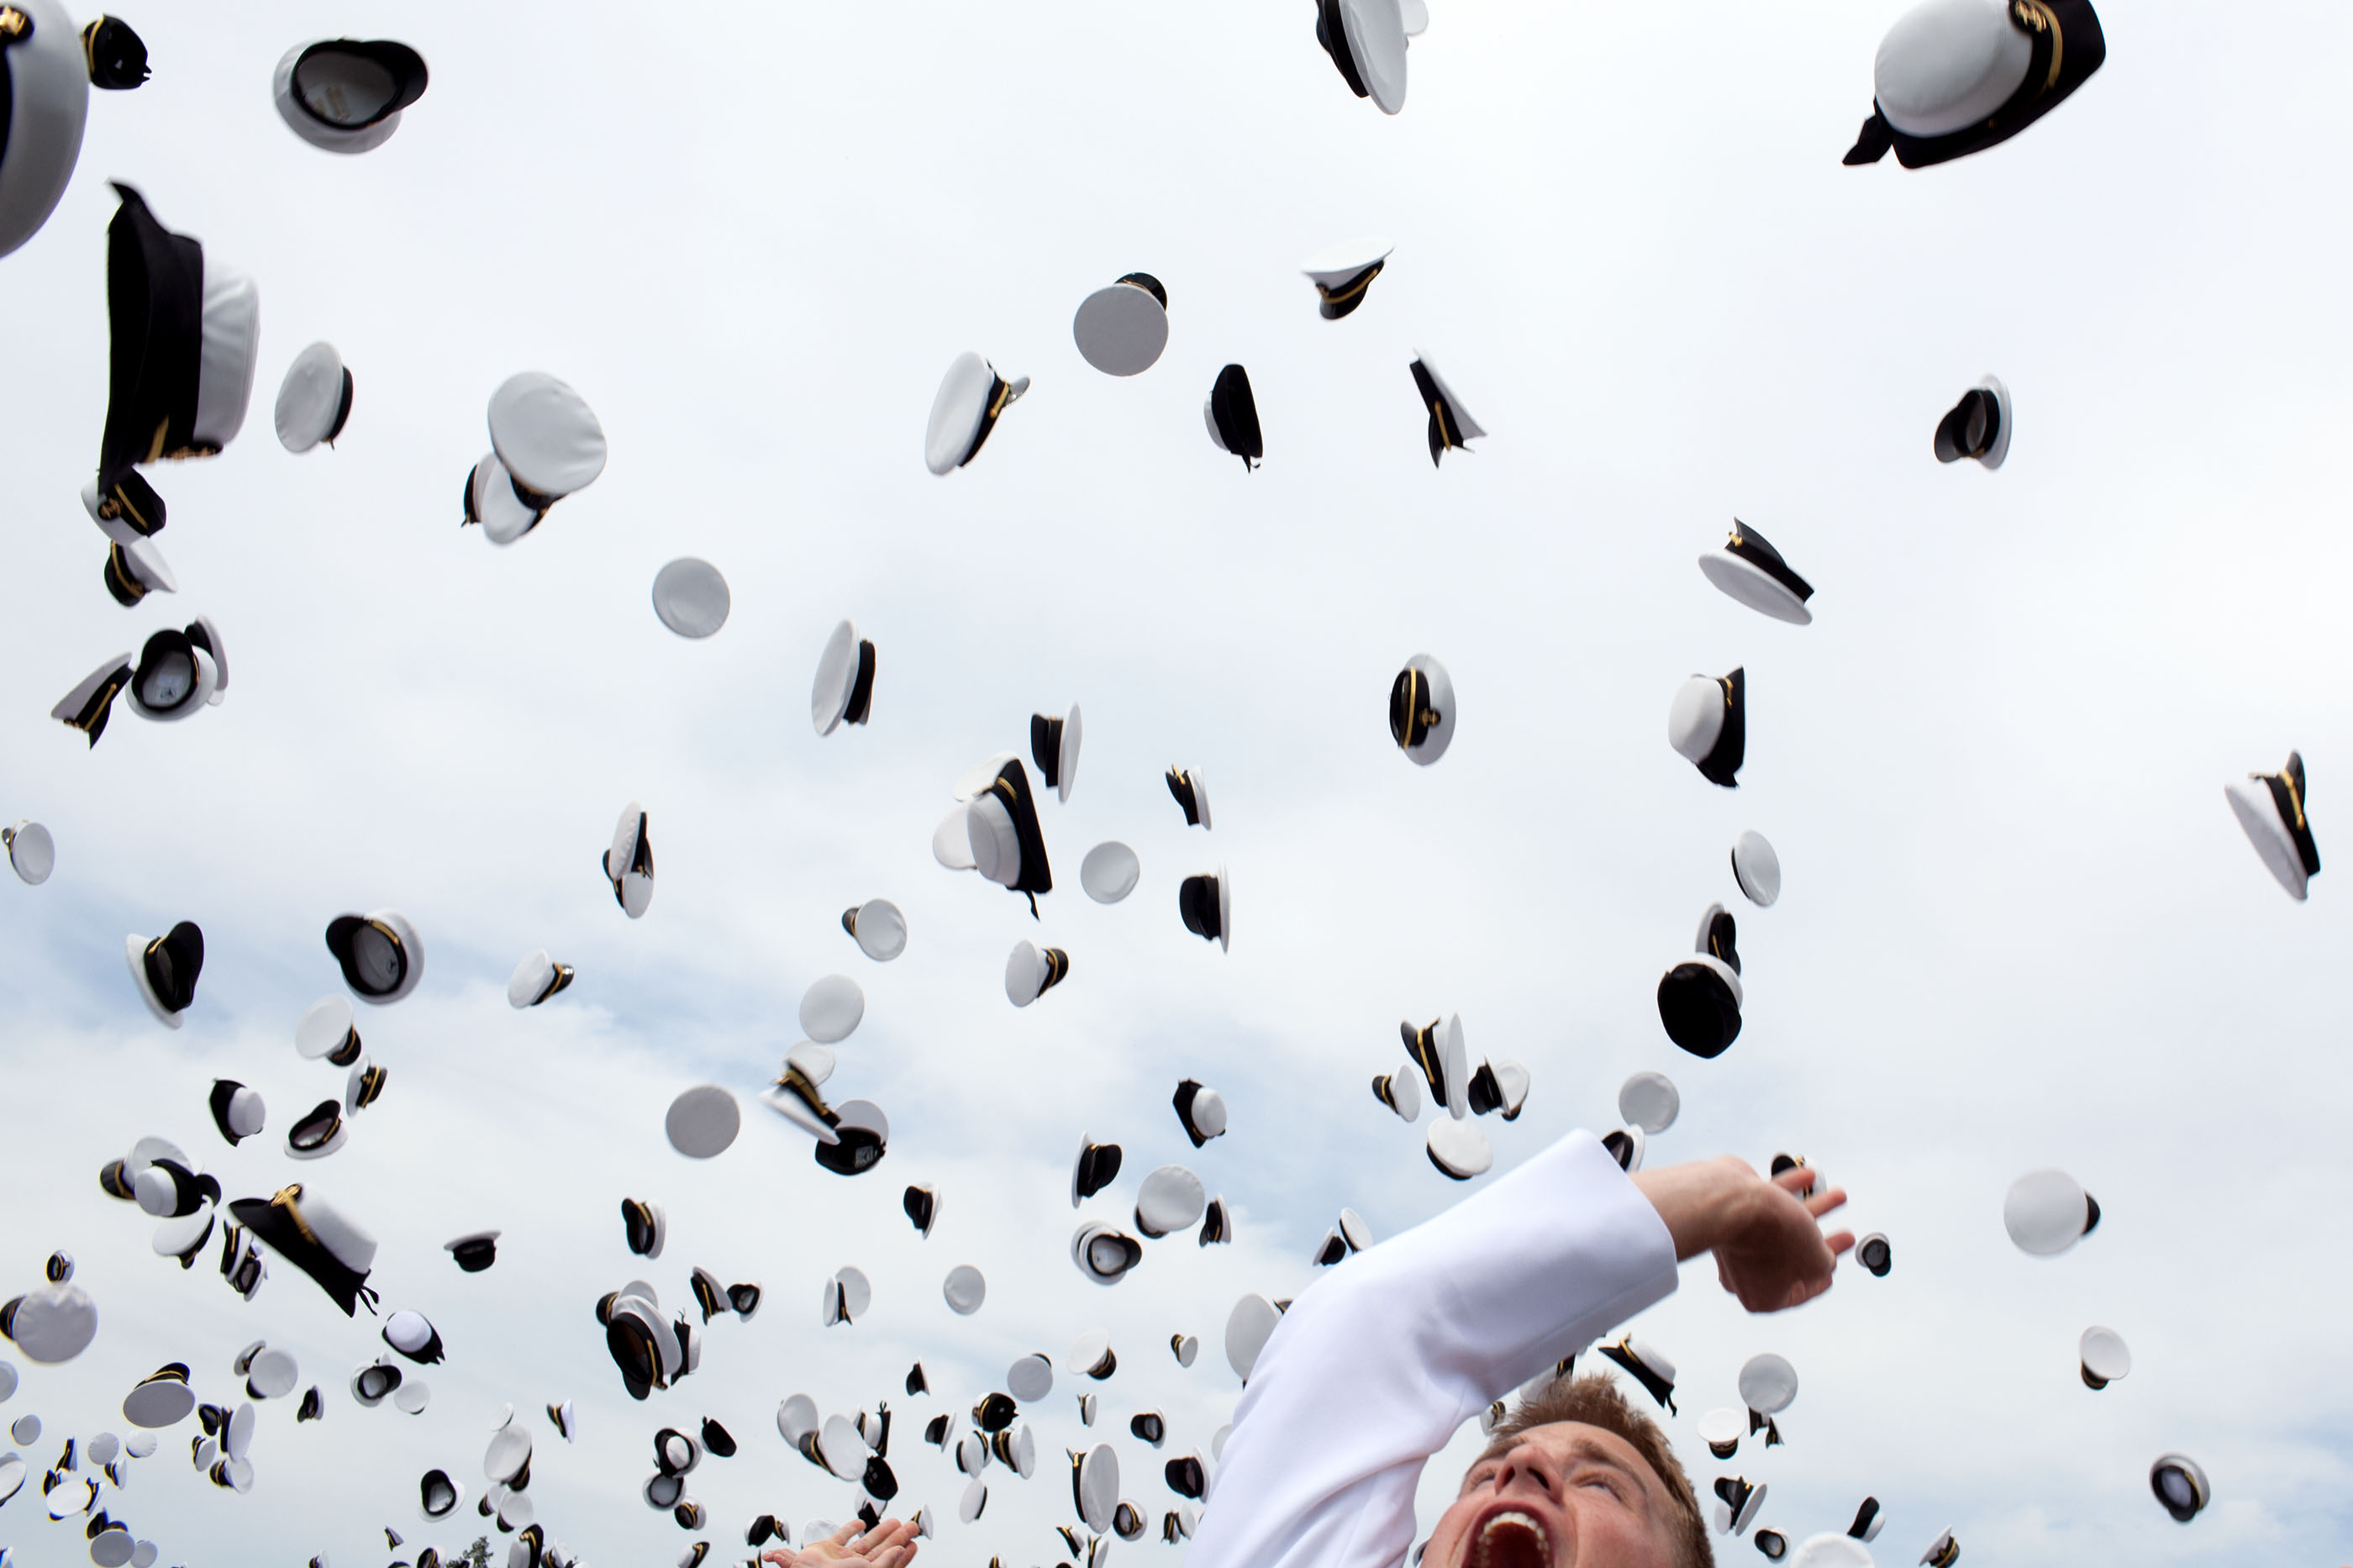 Maryland, May 22, 2009. Graduates celebrating at the U.S. Naval Academy in Annapolis. (Official White House photo by Pete Souza)